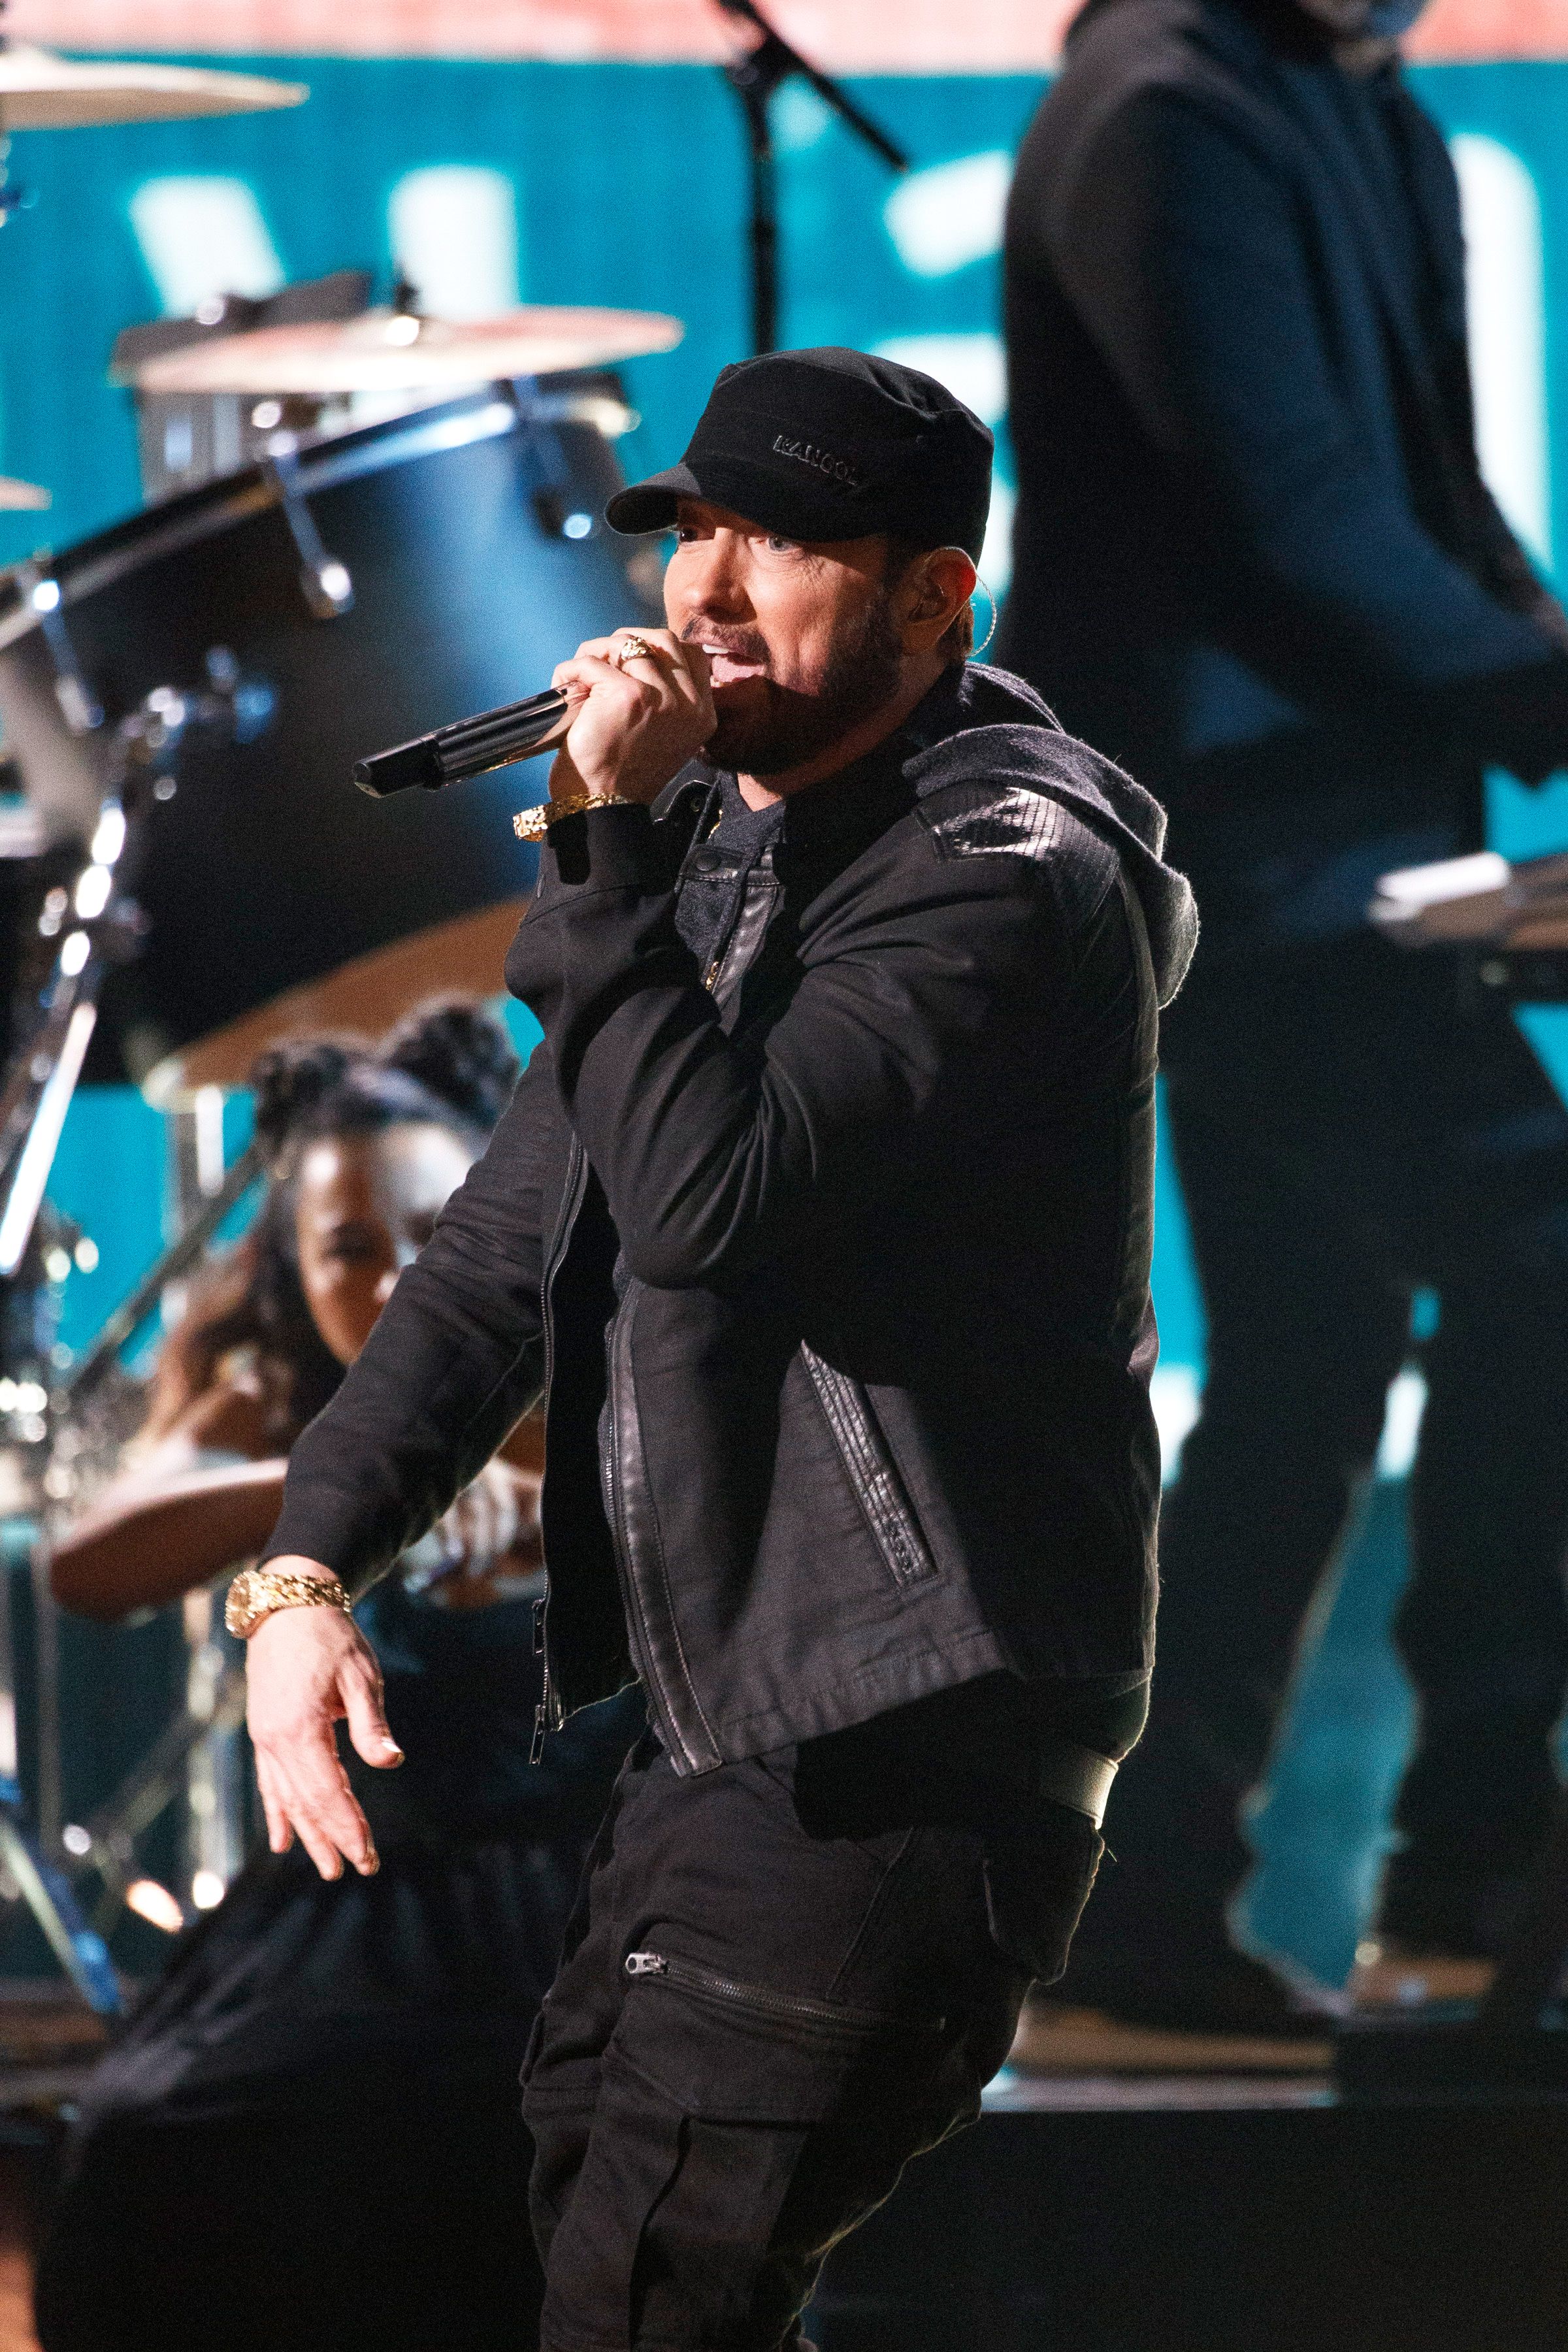 Eminem Performed At The 2020 Oscars And The Crowd Loved It